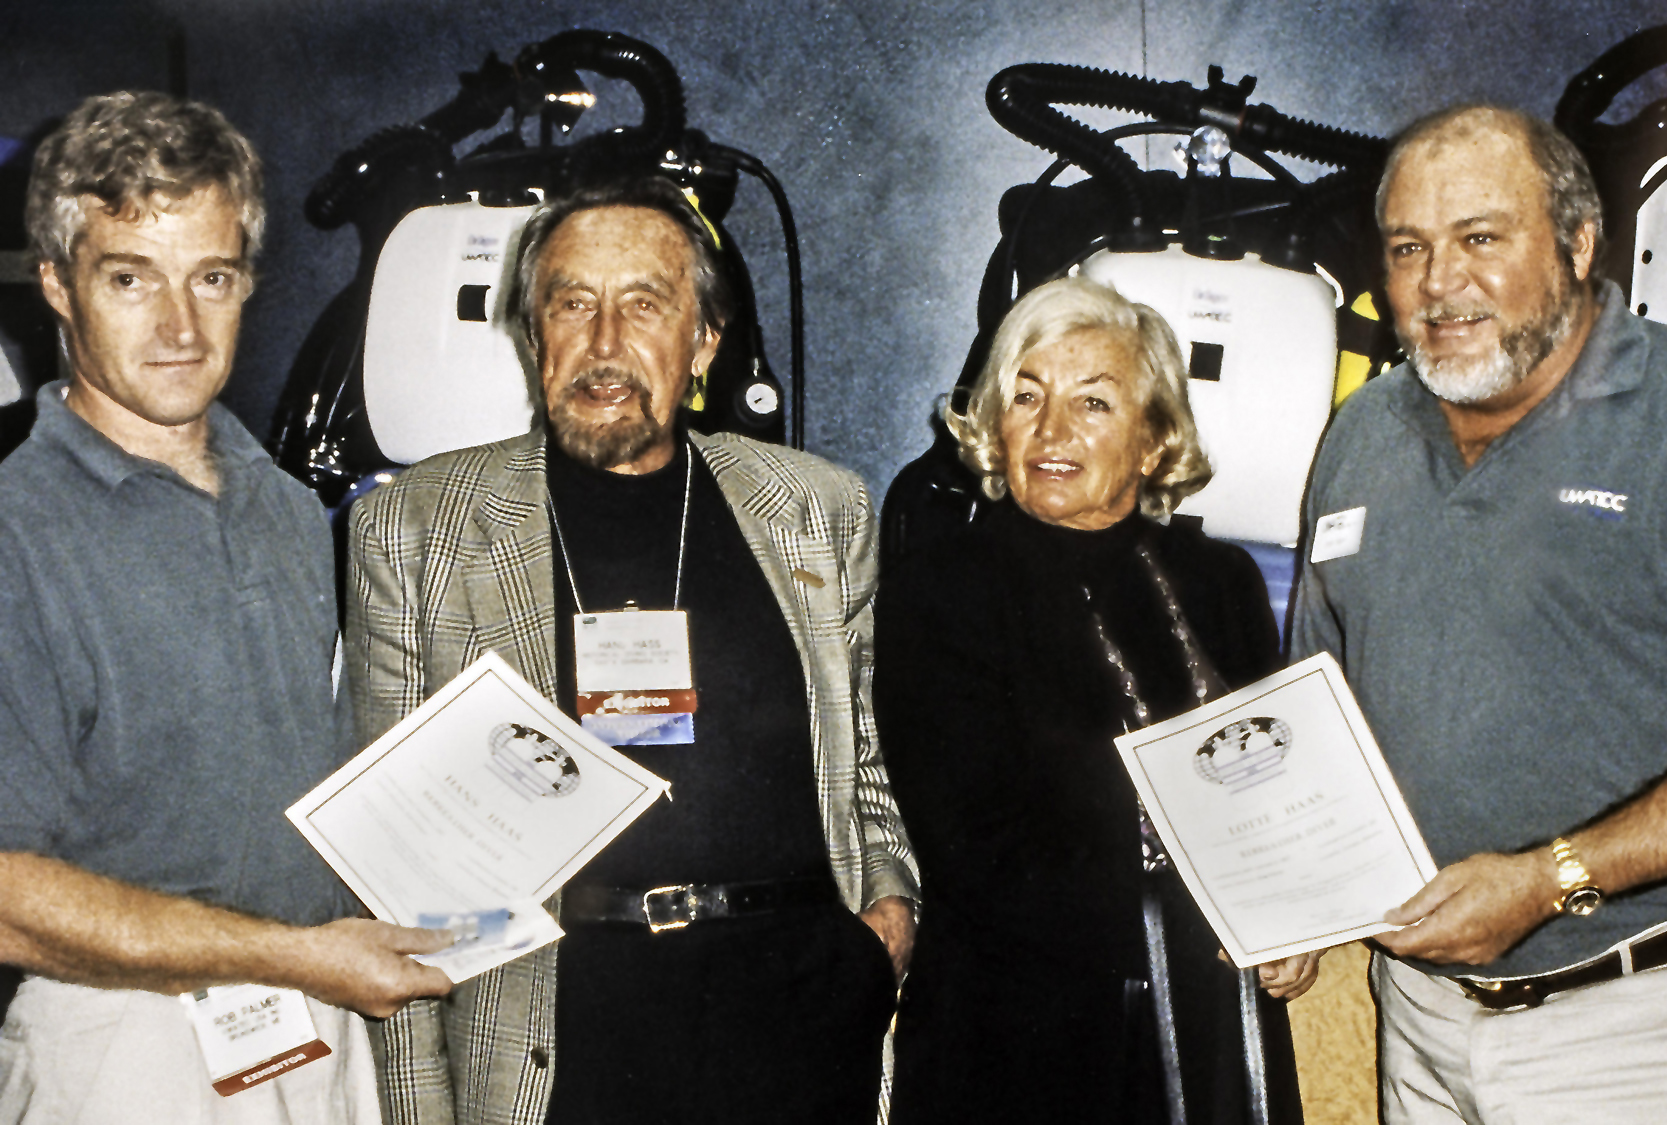 Rob Palmer, Hans and Lotte Hass, Bret Gilliam receiving TDI Rebreather certifications 1997